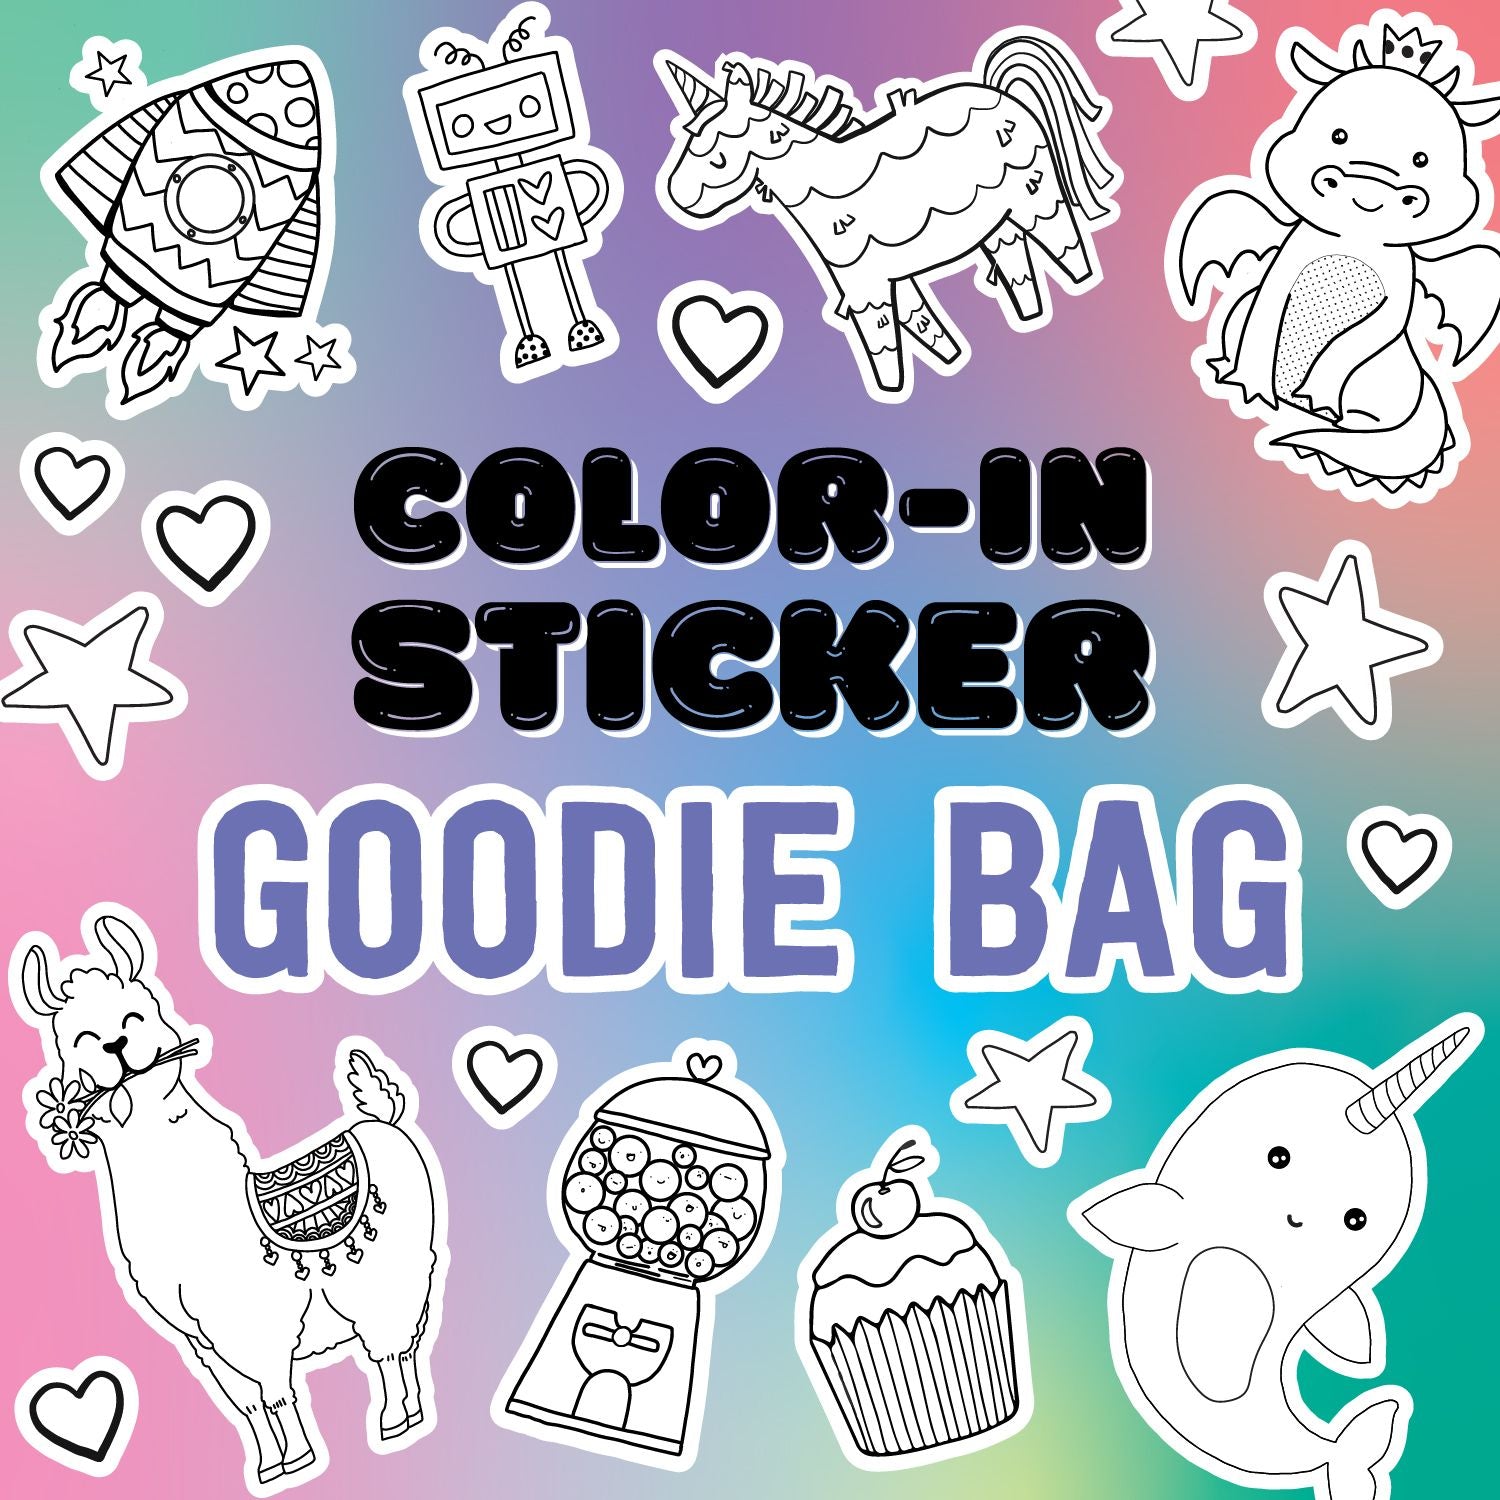 Color-in Sticker Goodie Bag